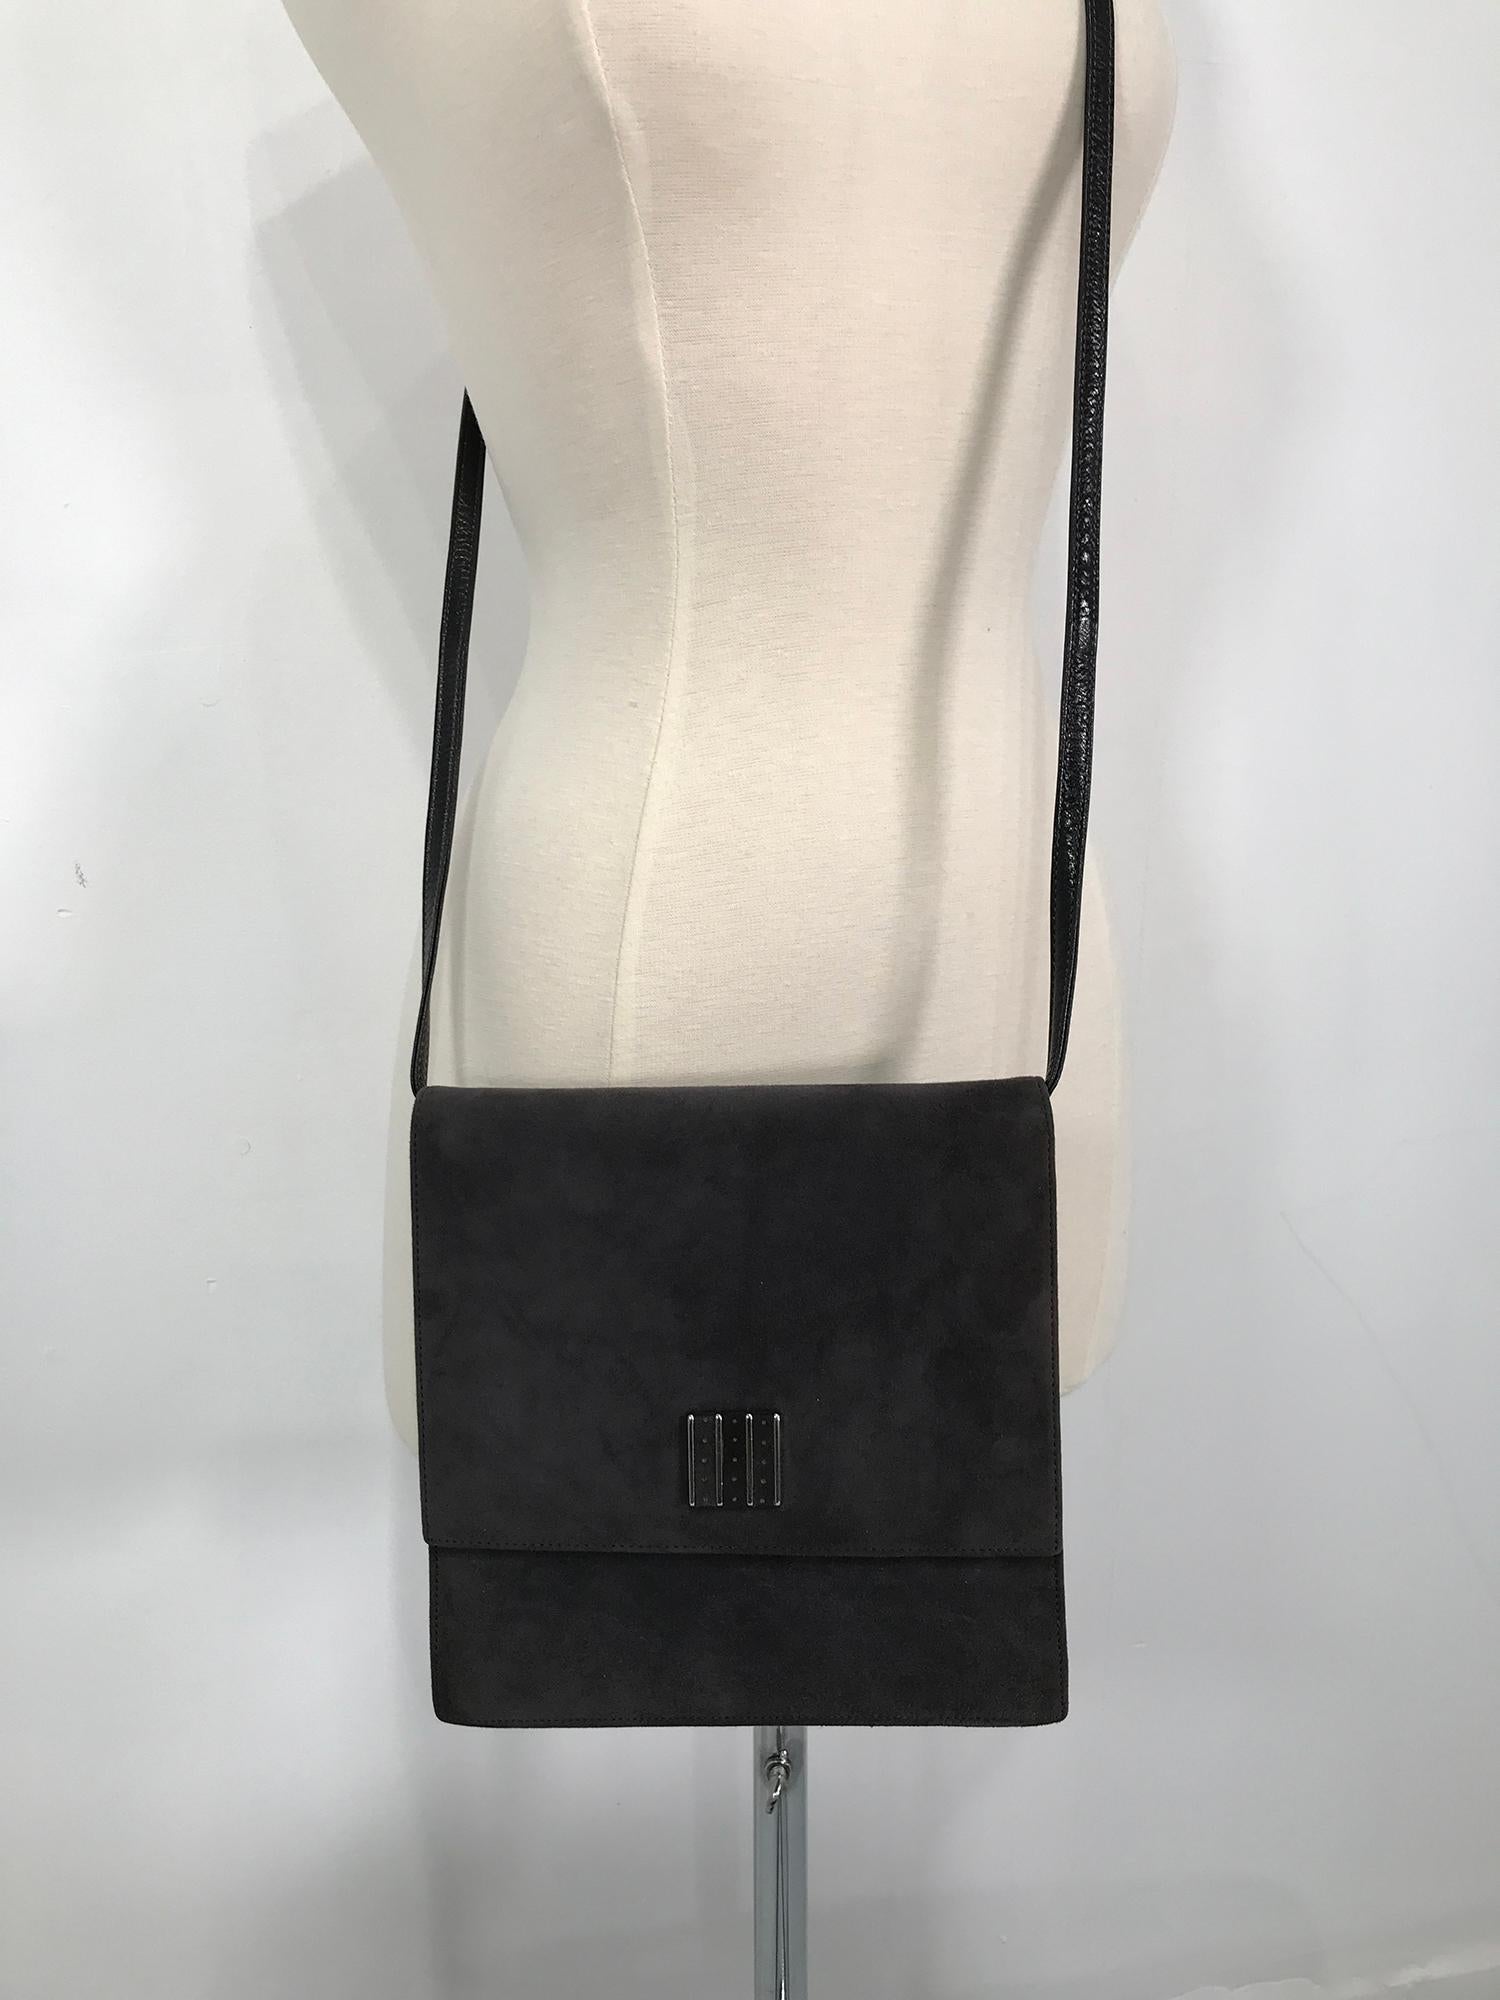 Bruno Magli Grey Suede & Leather Flap Front Cross Body or Clutch Handbag For Sale 1